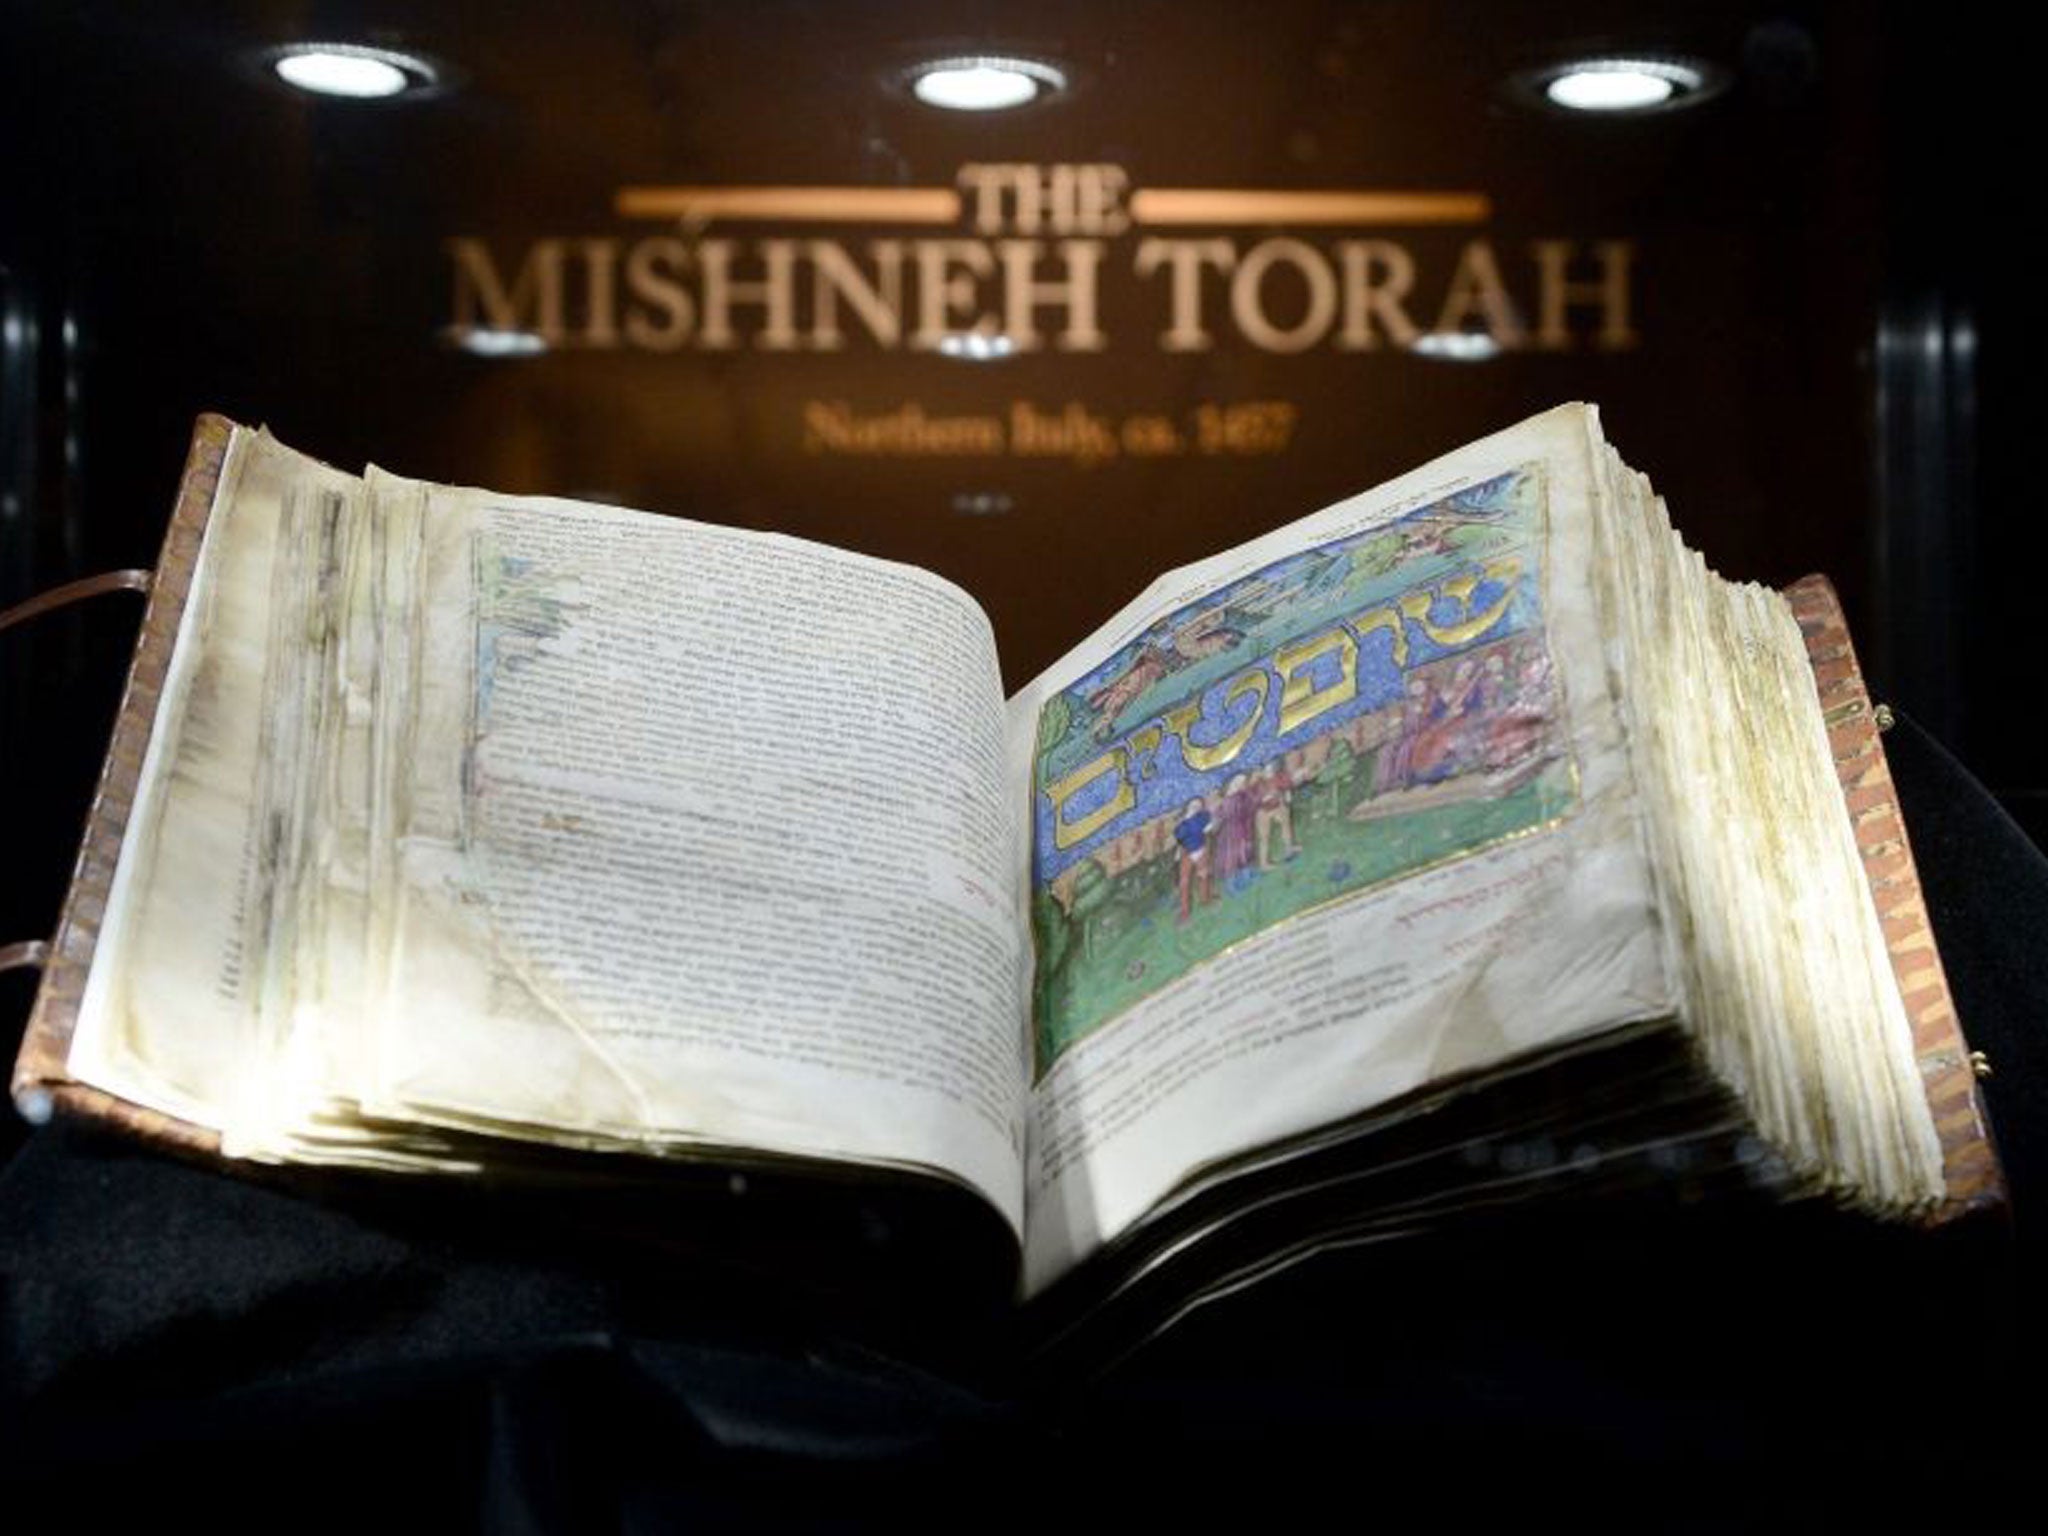 The Mishneh Torah on display at Sotheby's in New York,